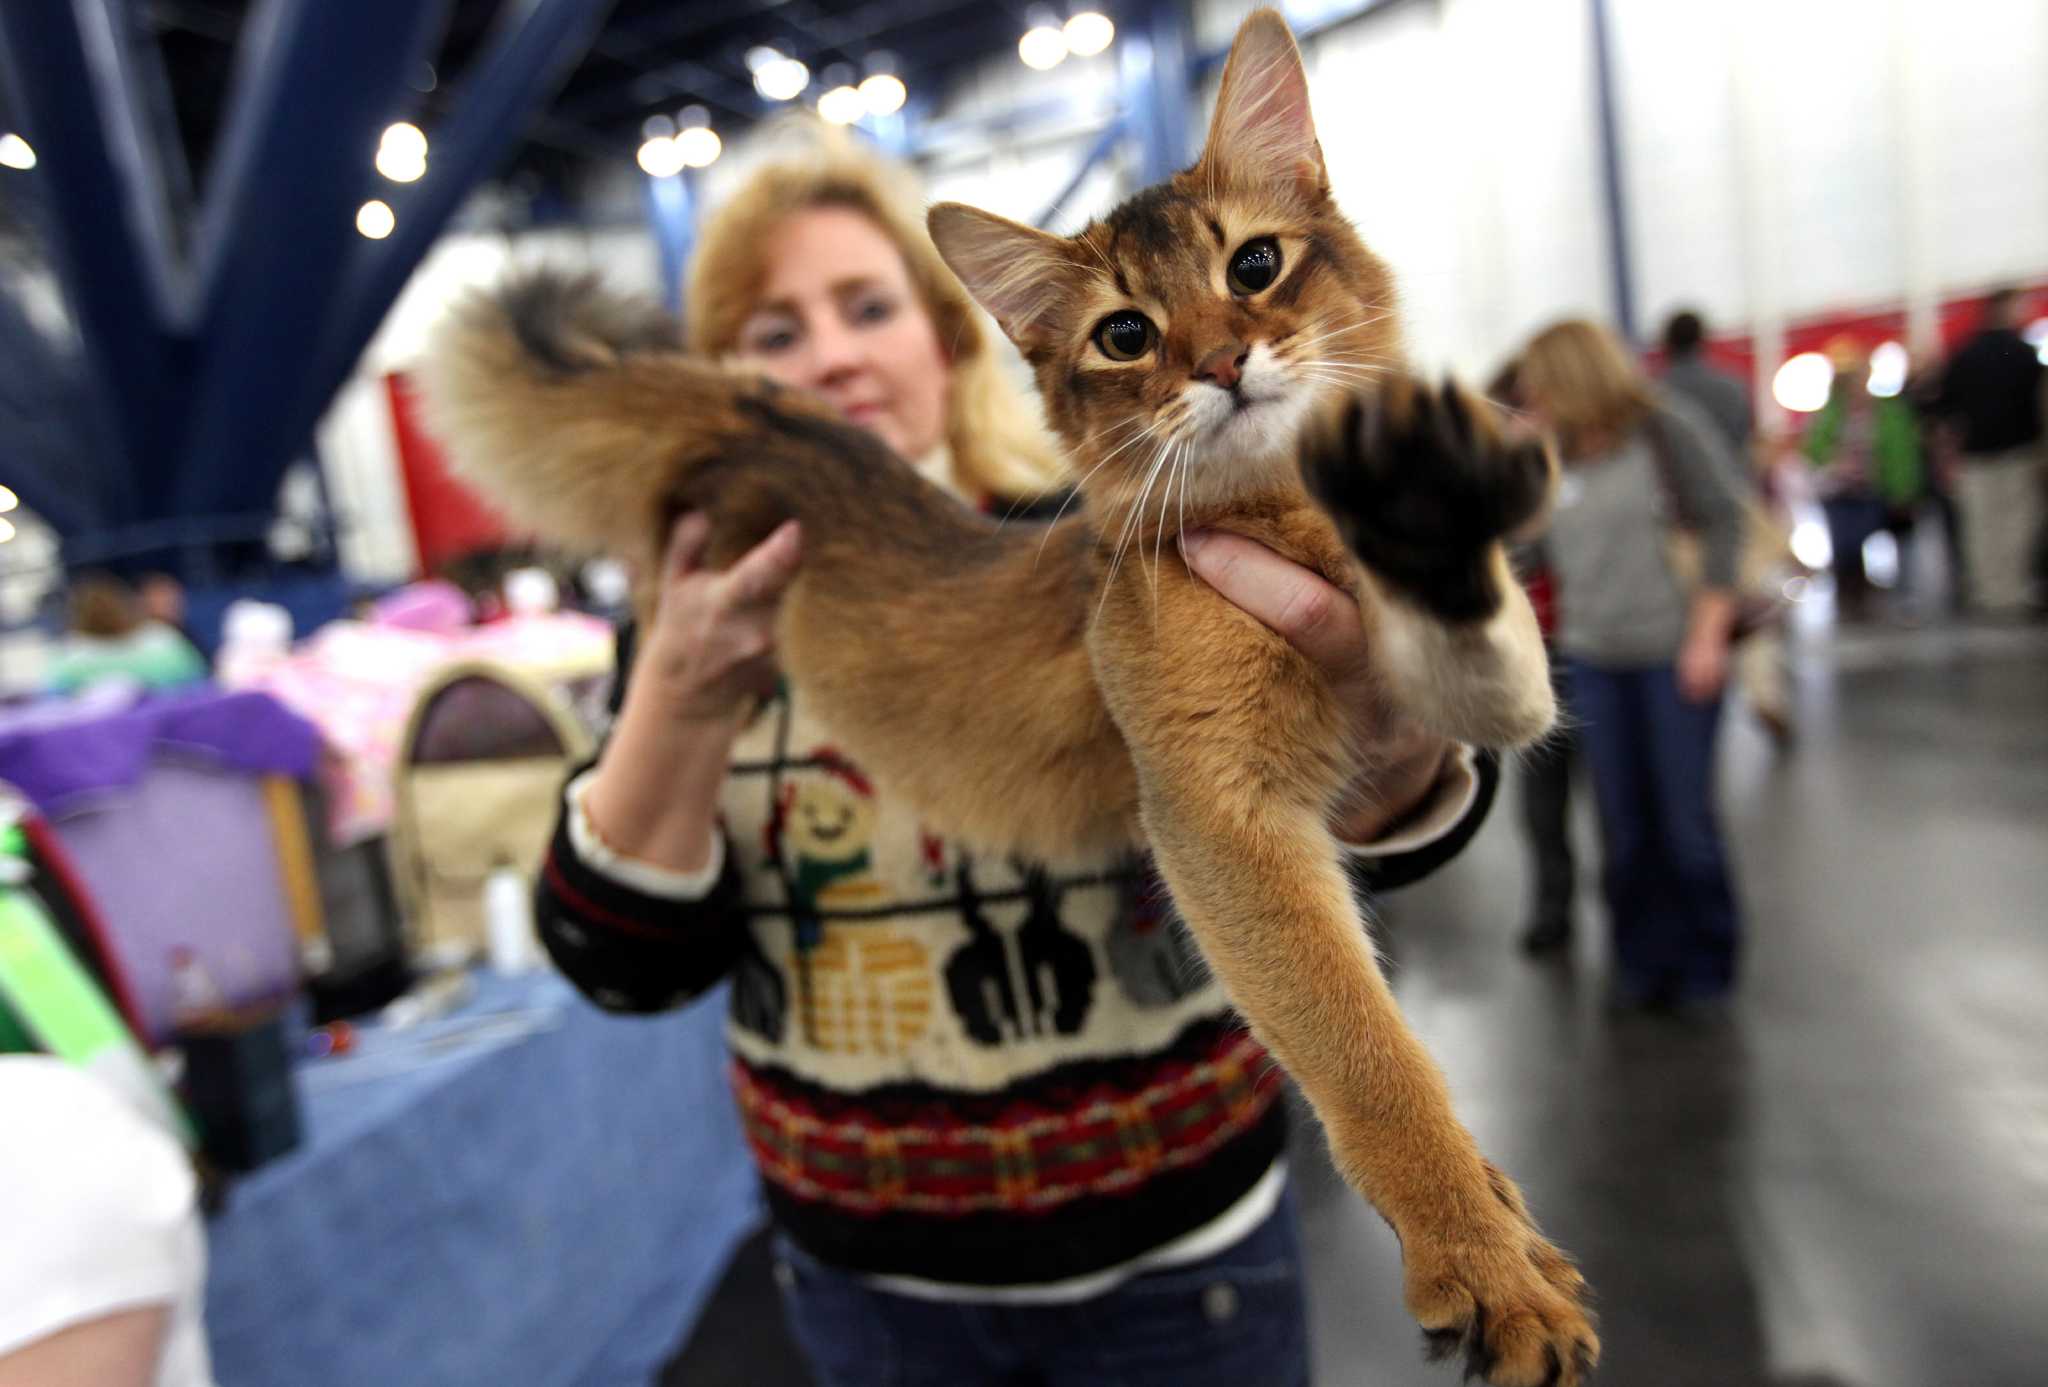 Cats strut their stuff at annual show